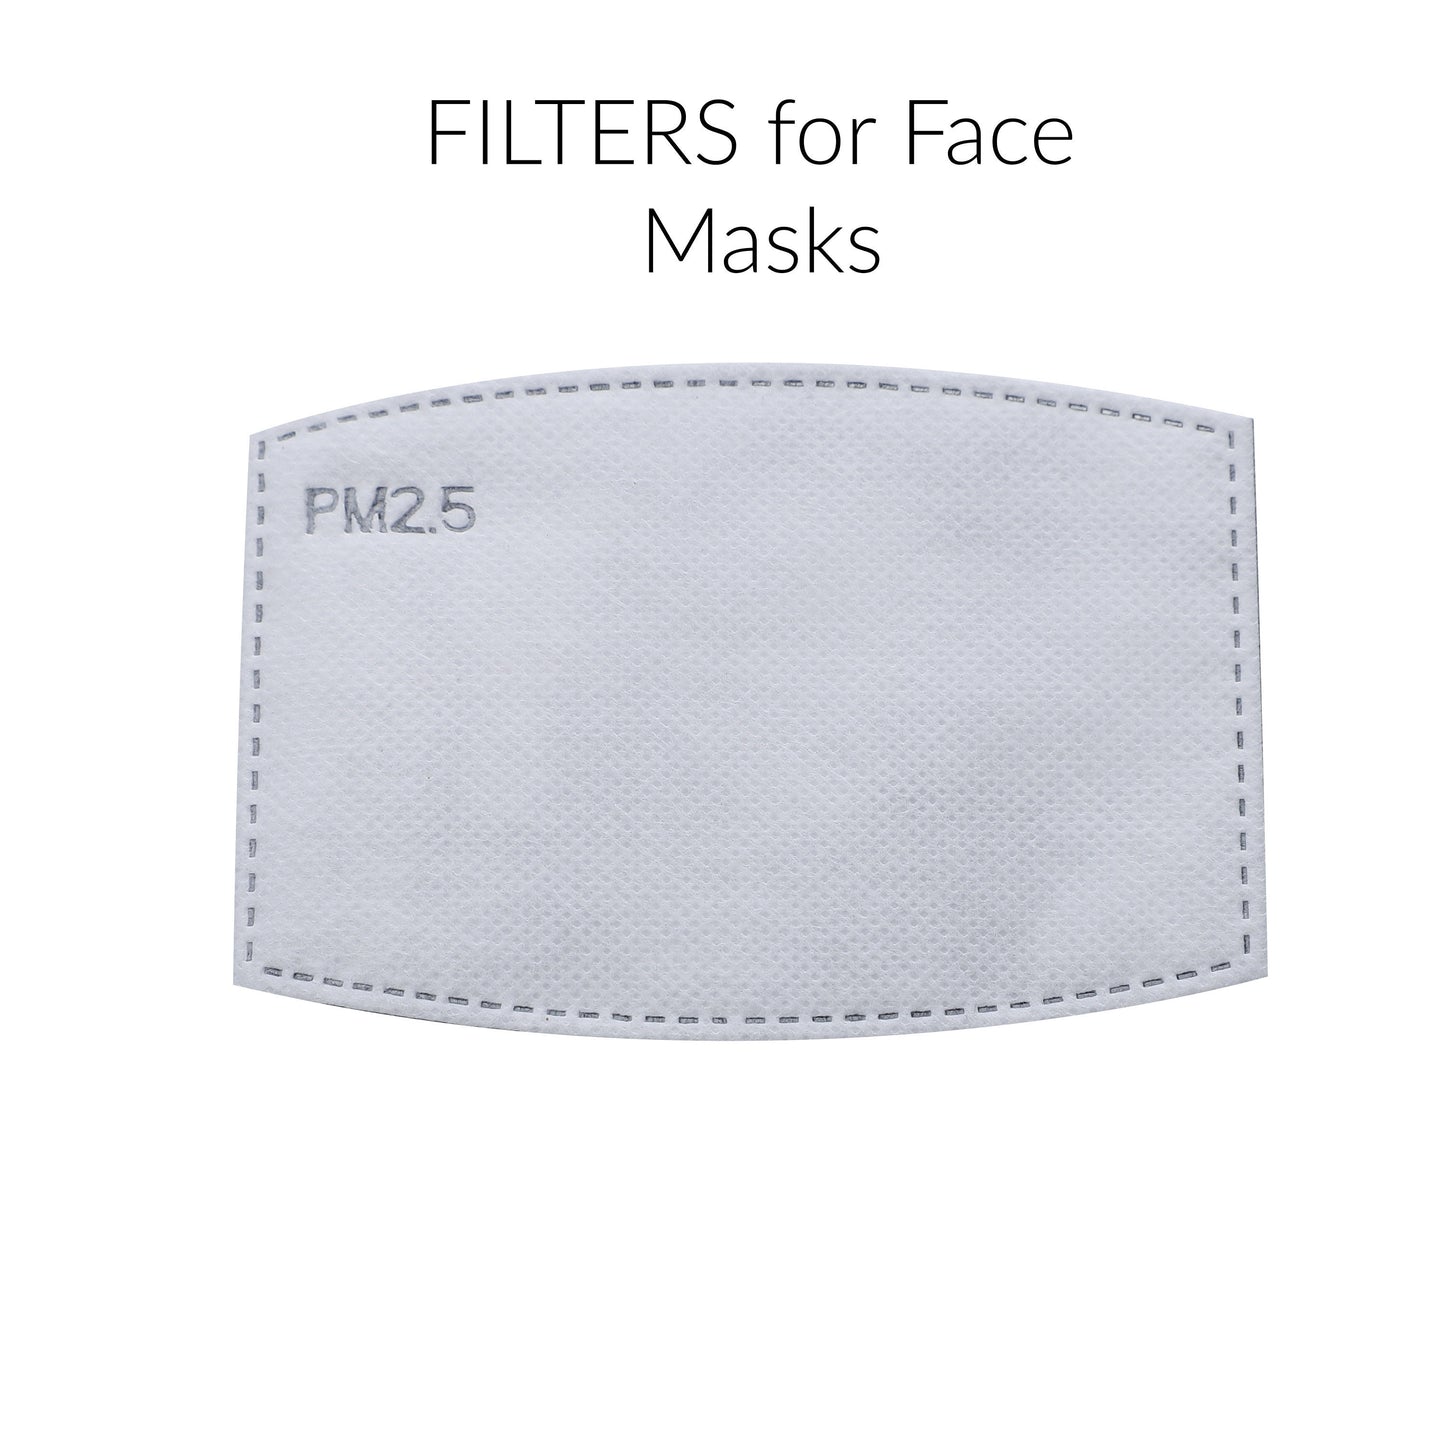 Multi layer Face Mask, Face Mask with Filter Pocket, Air pollution masks, Dust proof mask, Mask, Washable Cotton Adult mask